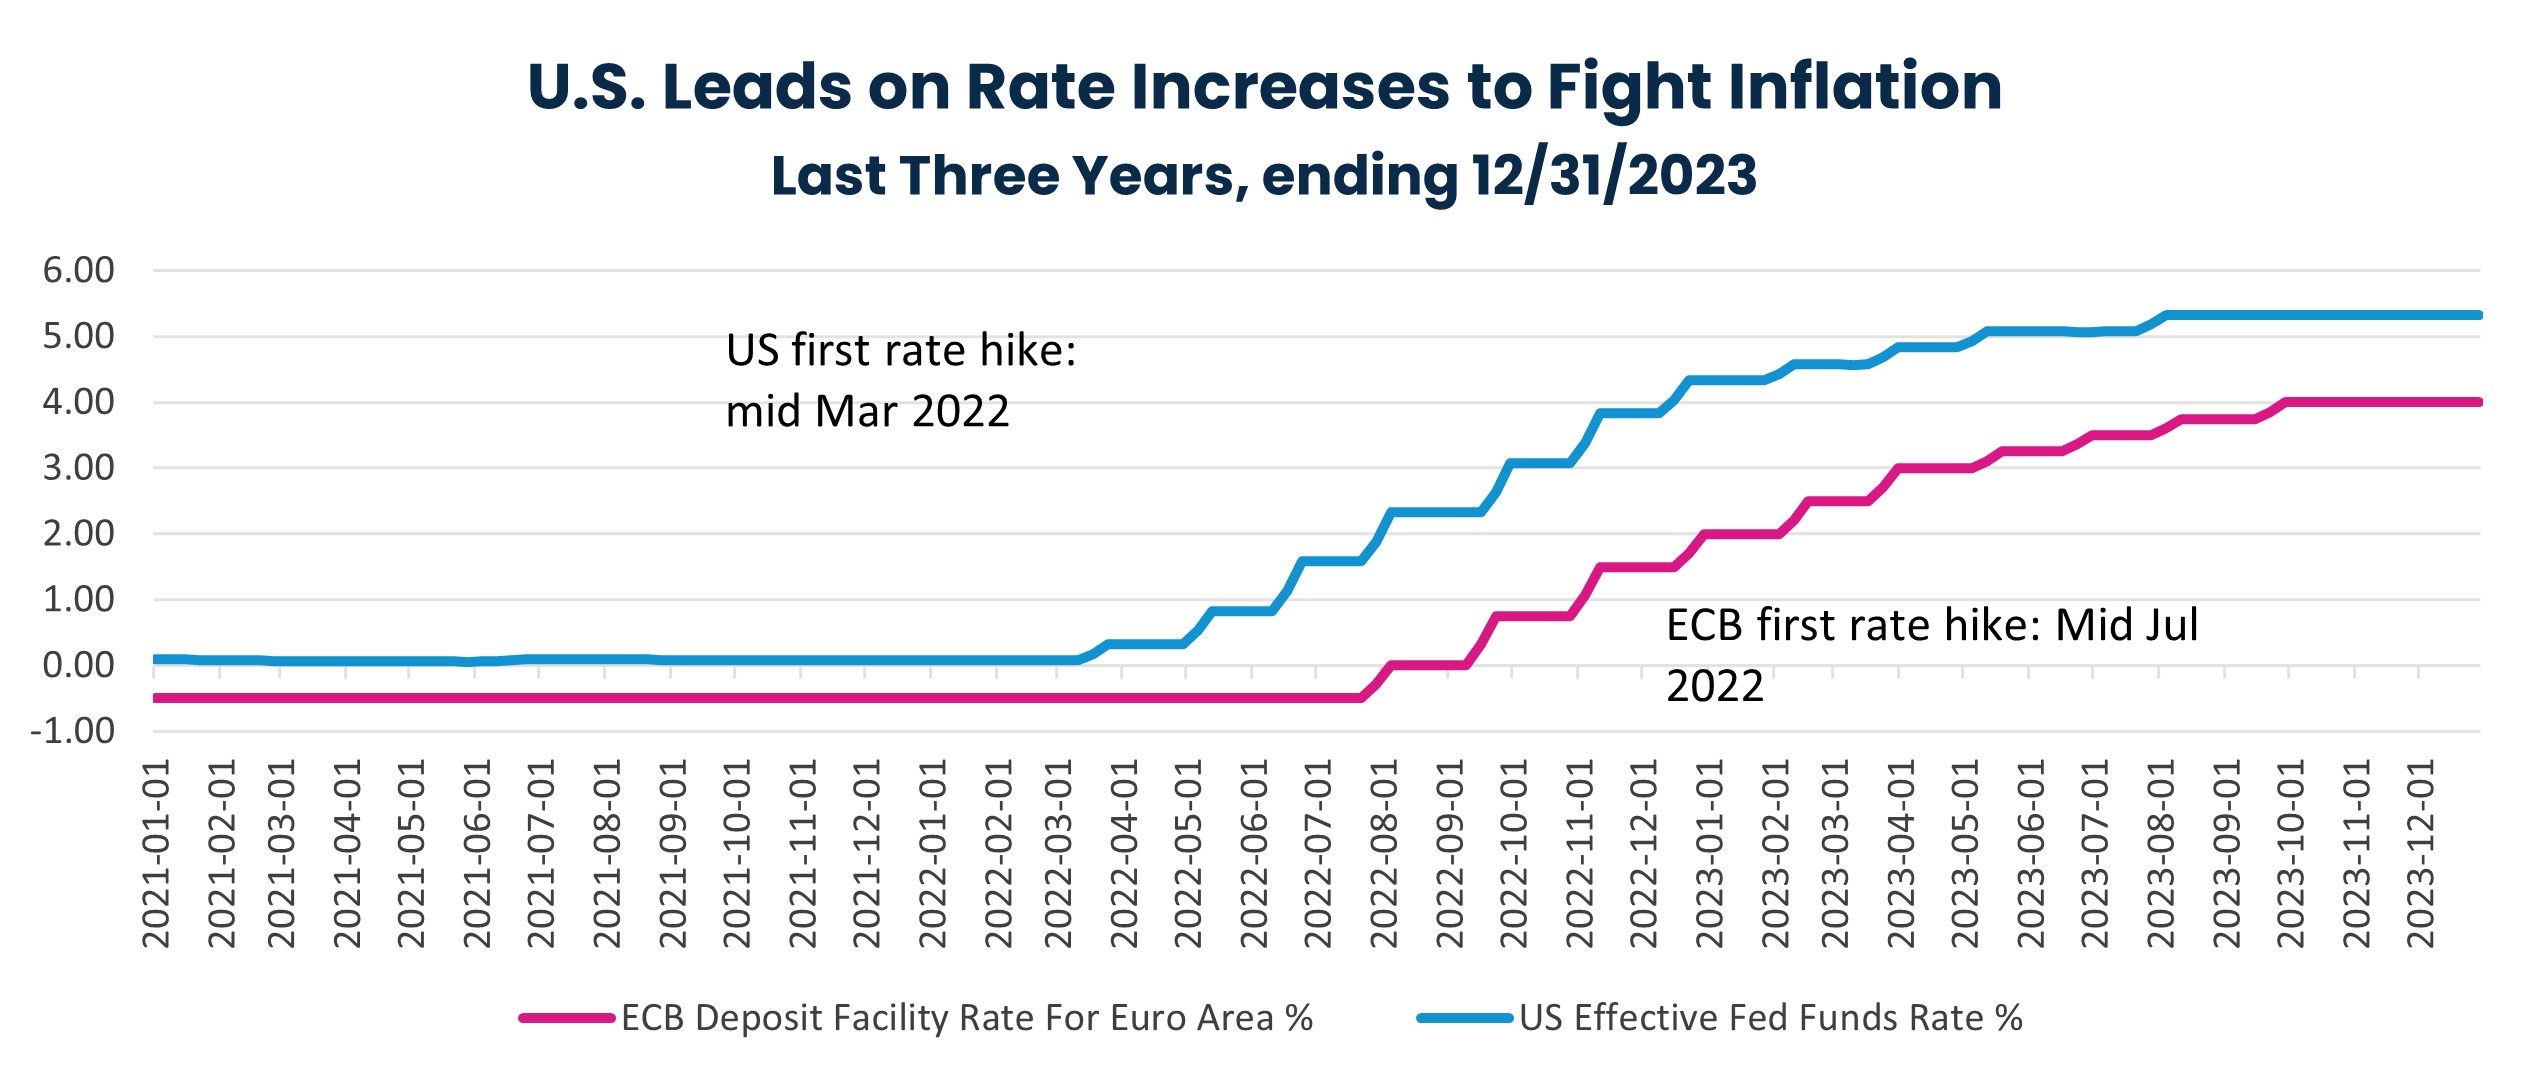 U.S. Leads on Rate Increases to Fight Inflation Last Three Years, ending 12/31/2023